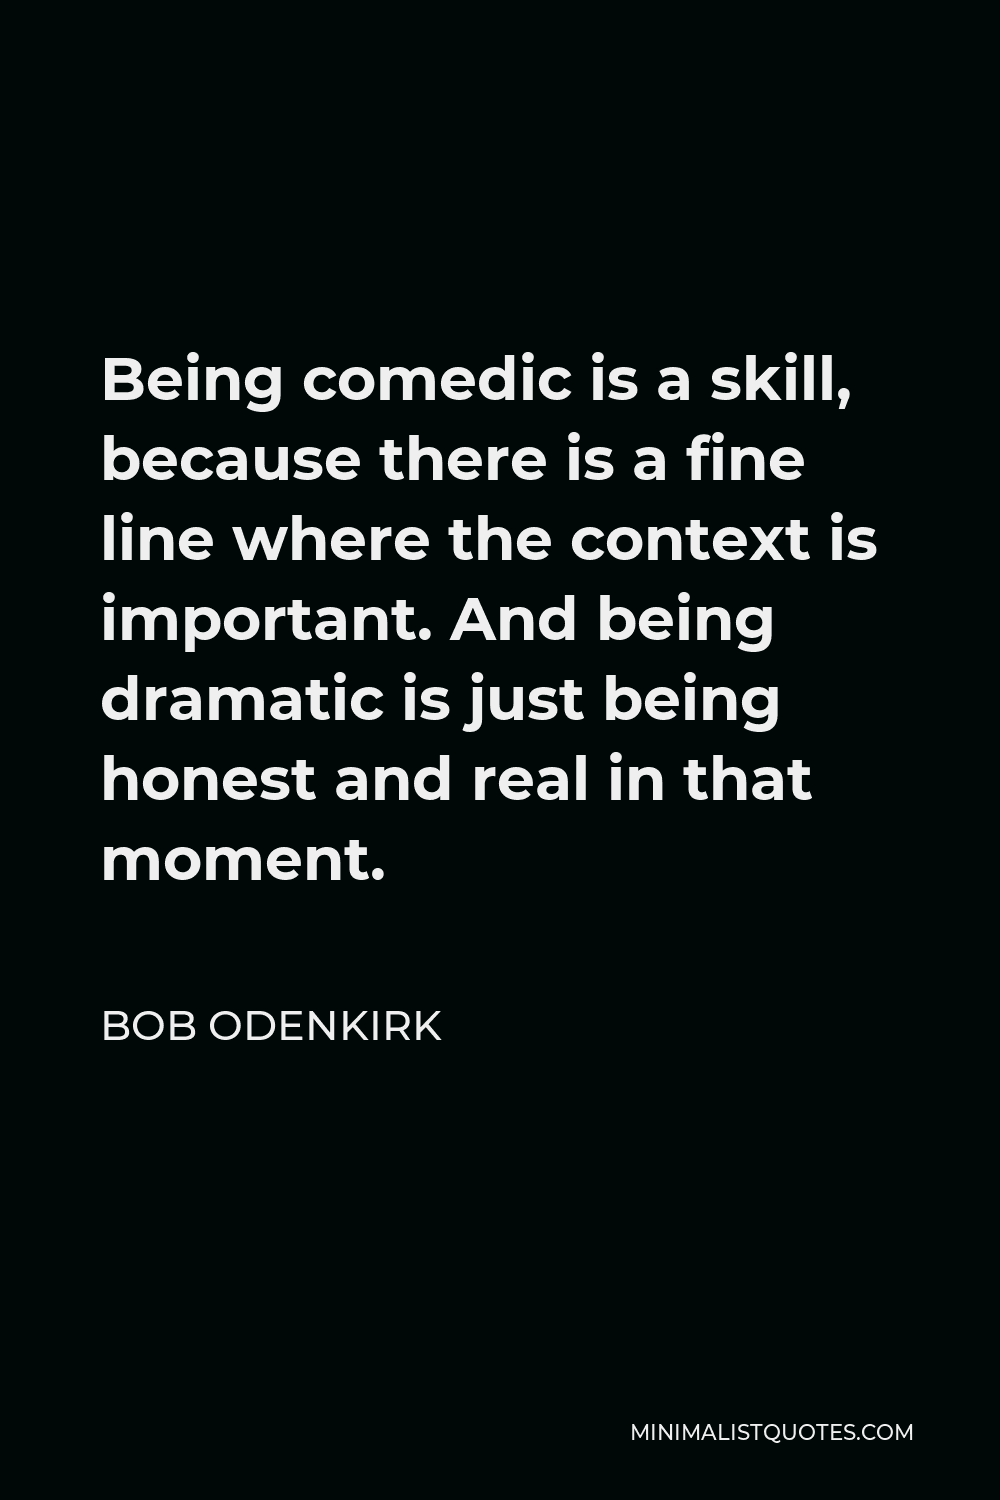 Bob Odenkirk Quote - Being comedic is a skill, because there is a fine line where the context is important. And being dramatic is just being honest and real in that moment.